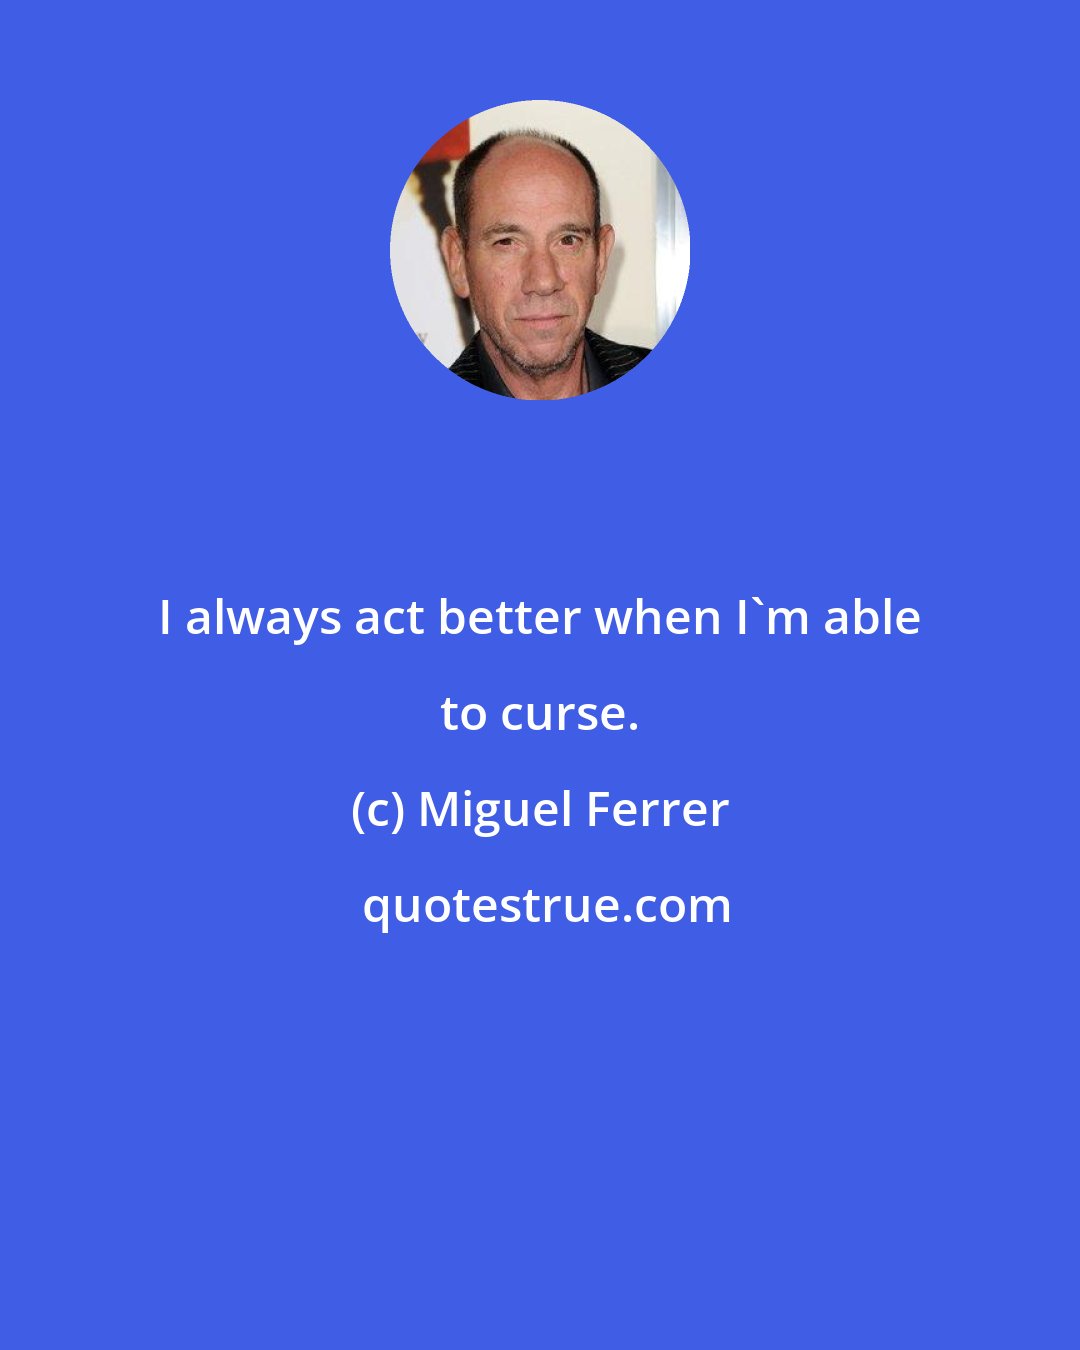 Miguel Ferrer: I always act better when I'm able to curse.